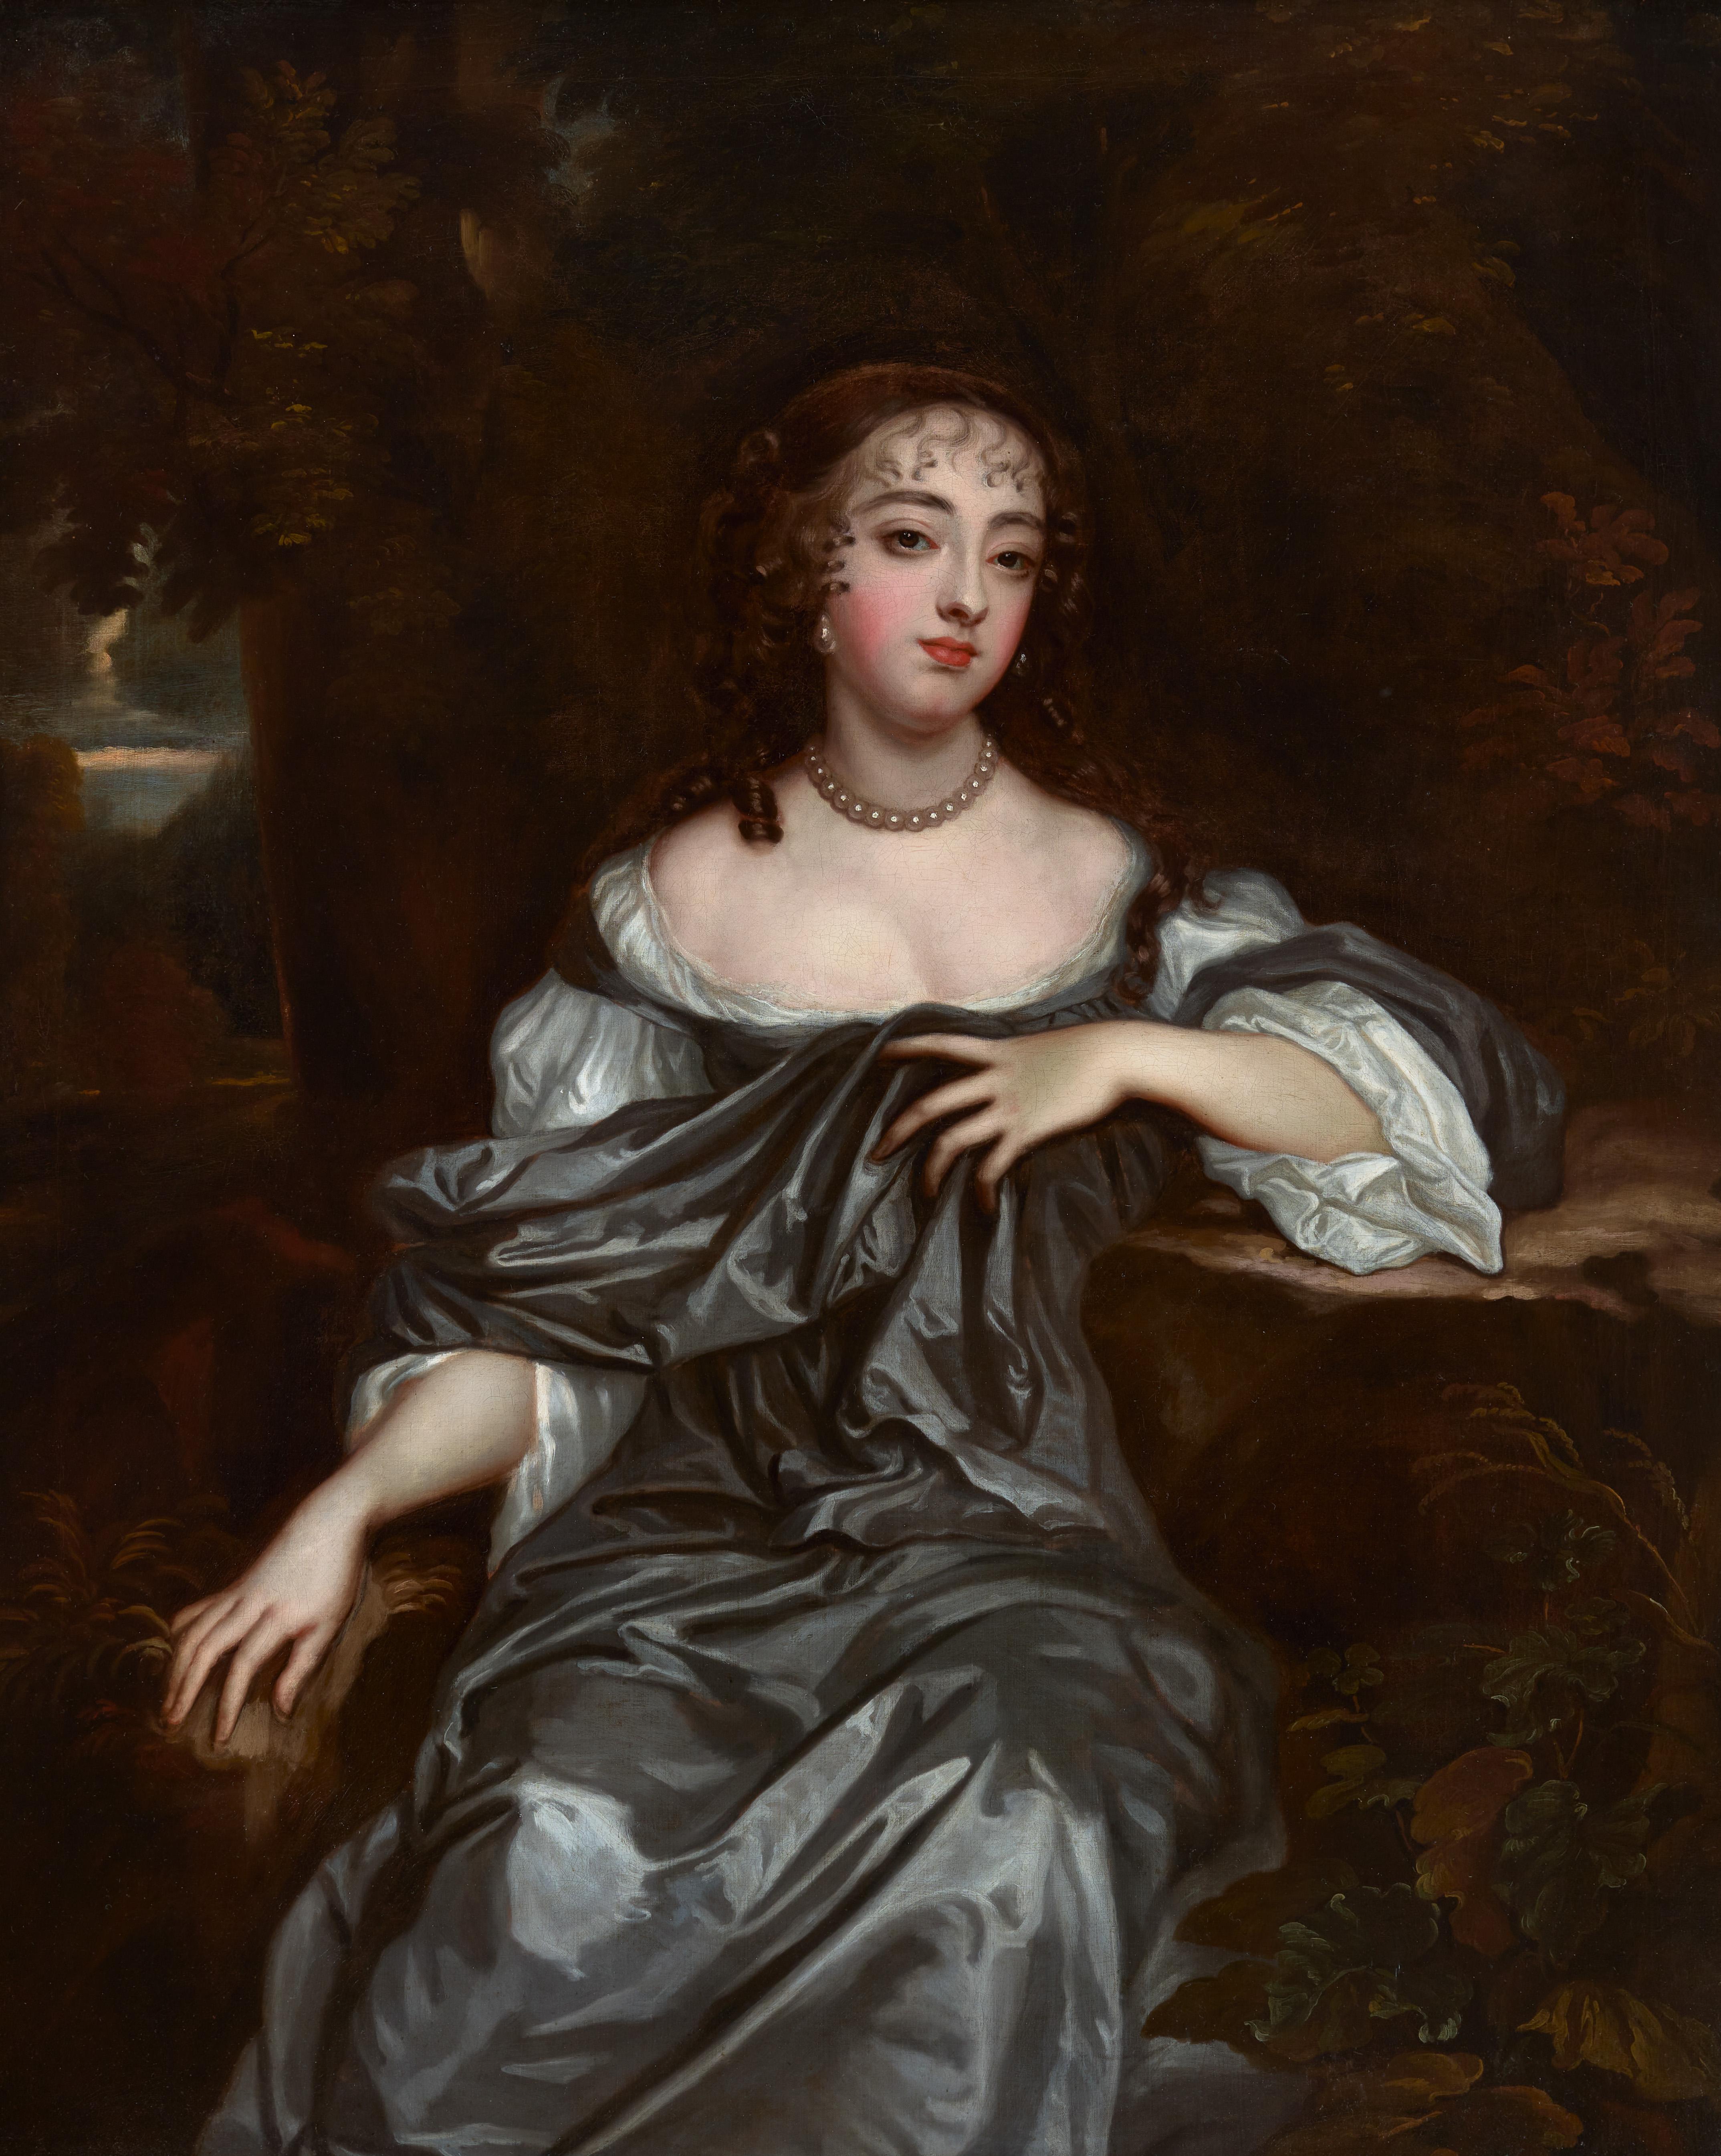 Portrait of Frances, Lady Whitmore nee Brooke (c.1638-1690)
Circle of Sir Peter Lely (1618-1680)

Titan Fine Art presents this exquisite portrait that depicts Frances Brooke, Lady Whitmore when she was around twenty-five years of age.  Depicted